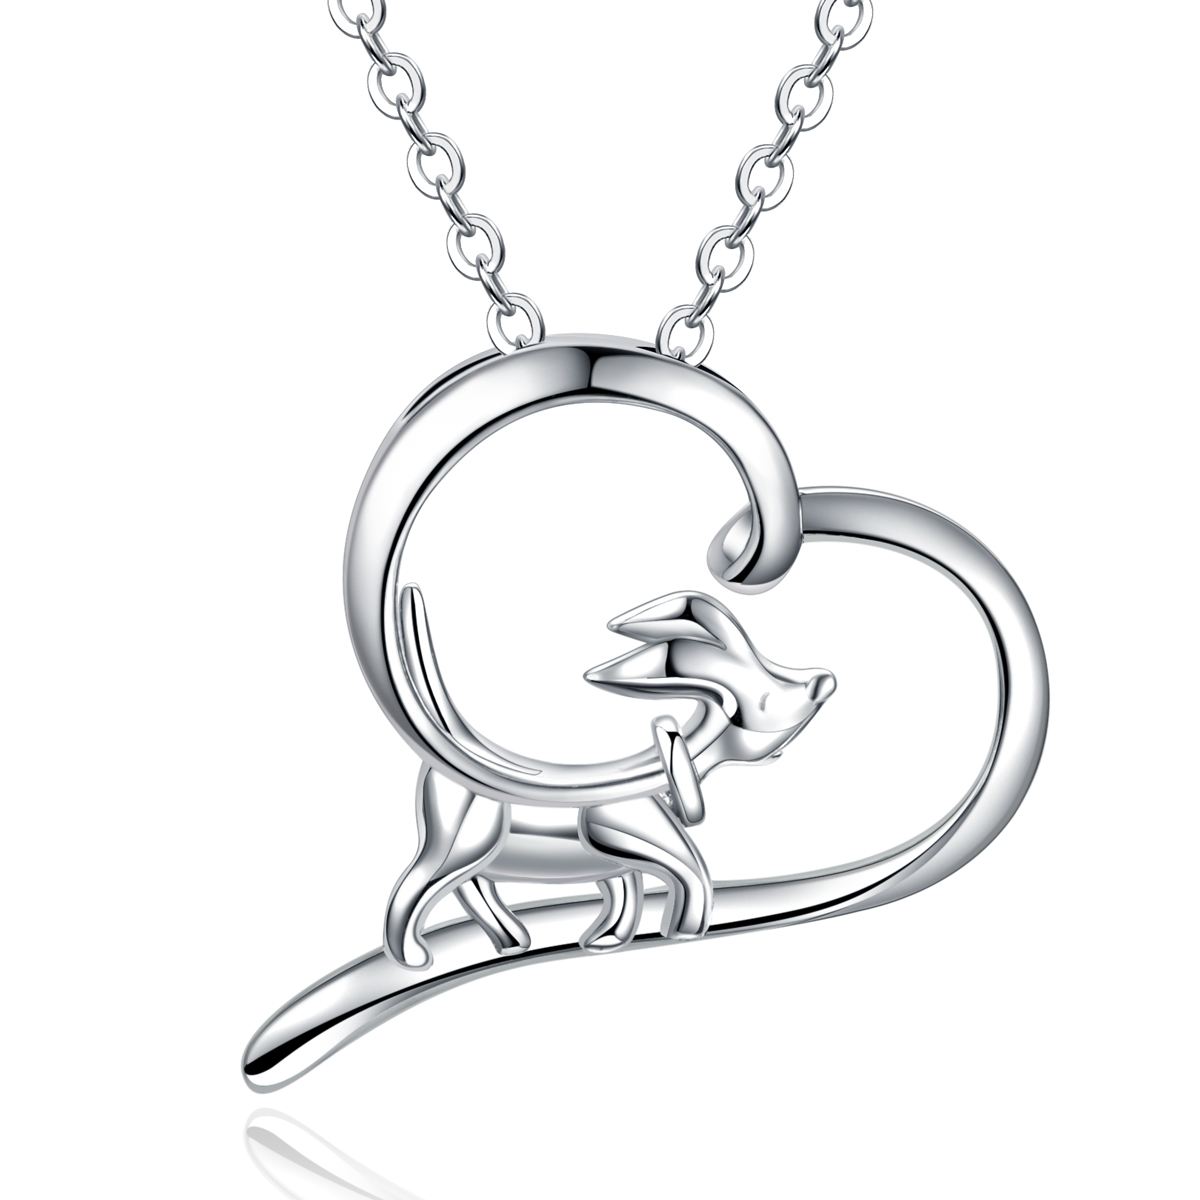 Merryshine Jewelry S925 Sterling Silver Brave Dog Cute Animal Necklace Pendant for Girl